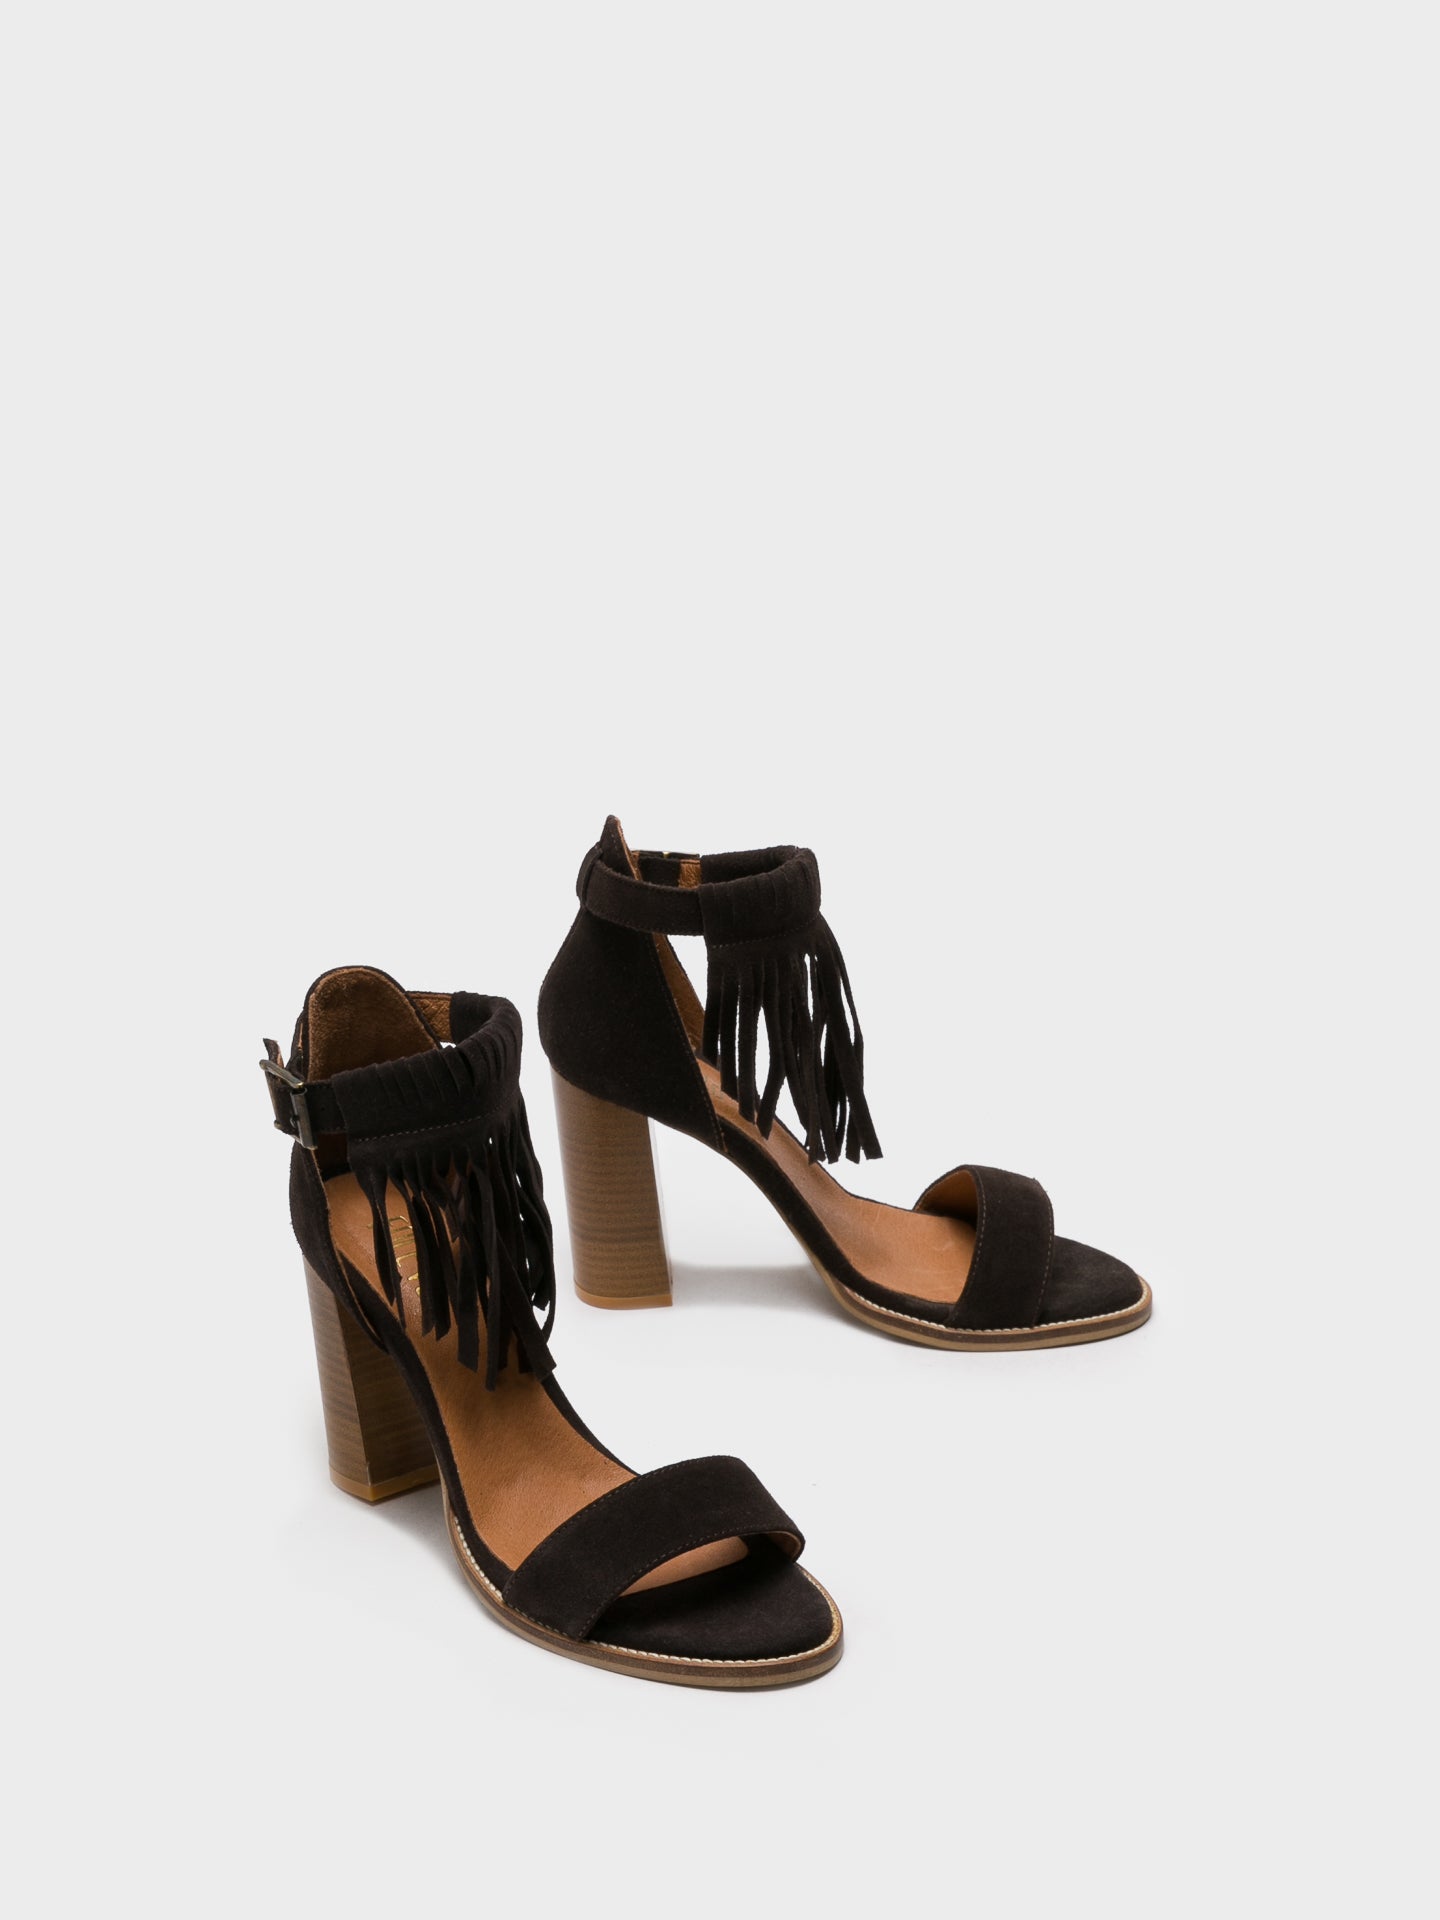 Foreva Chocolate Strappy Sandals